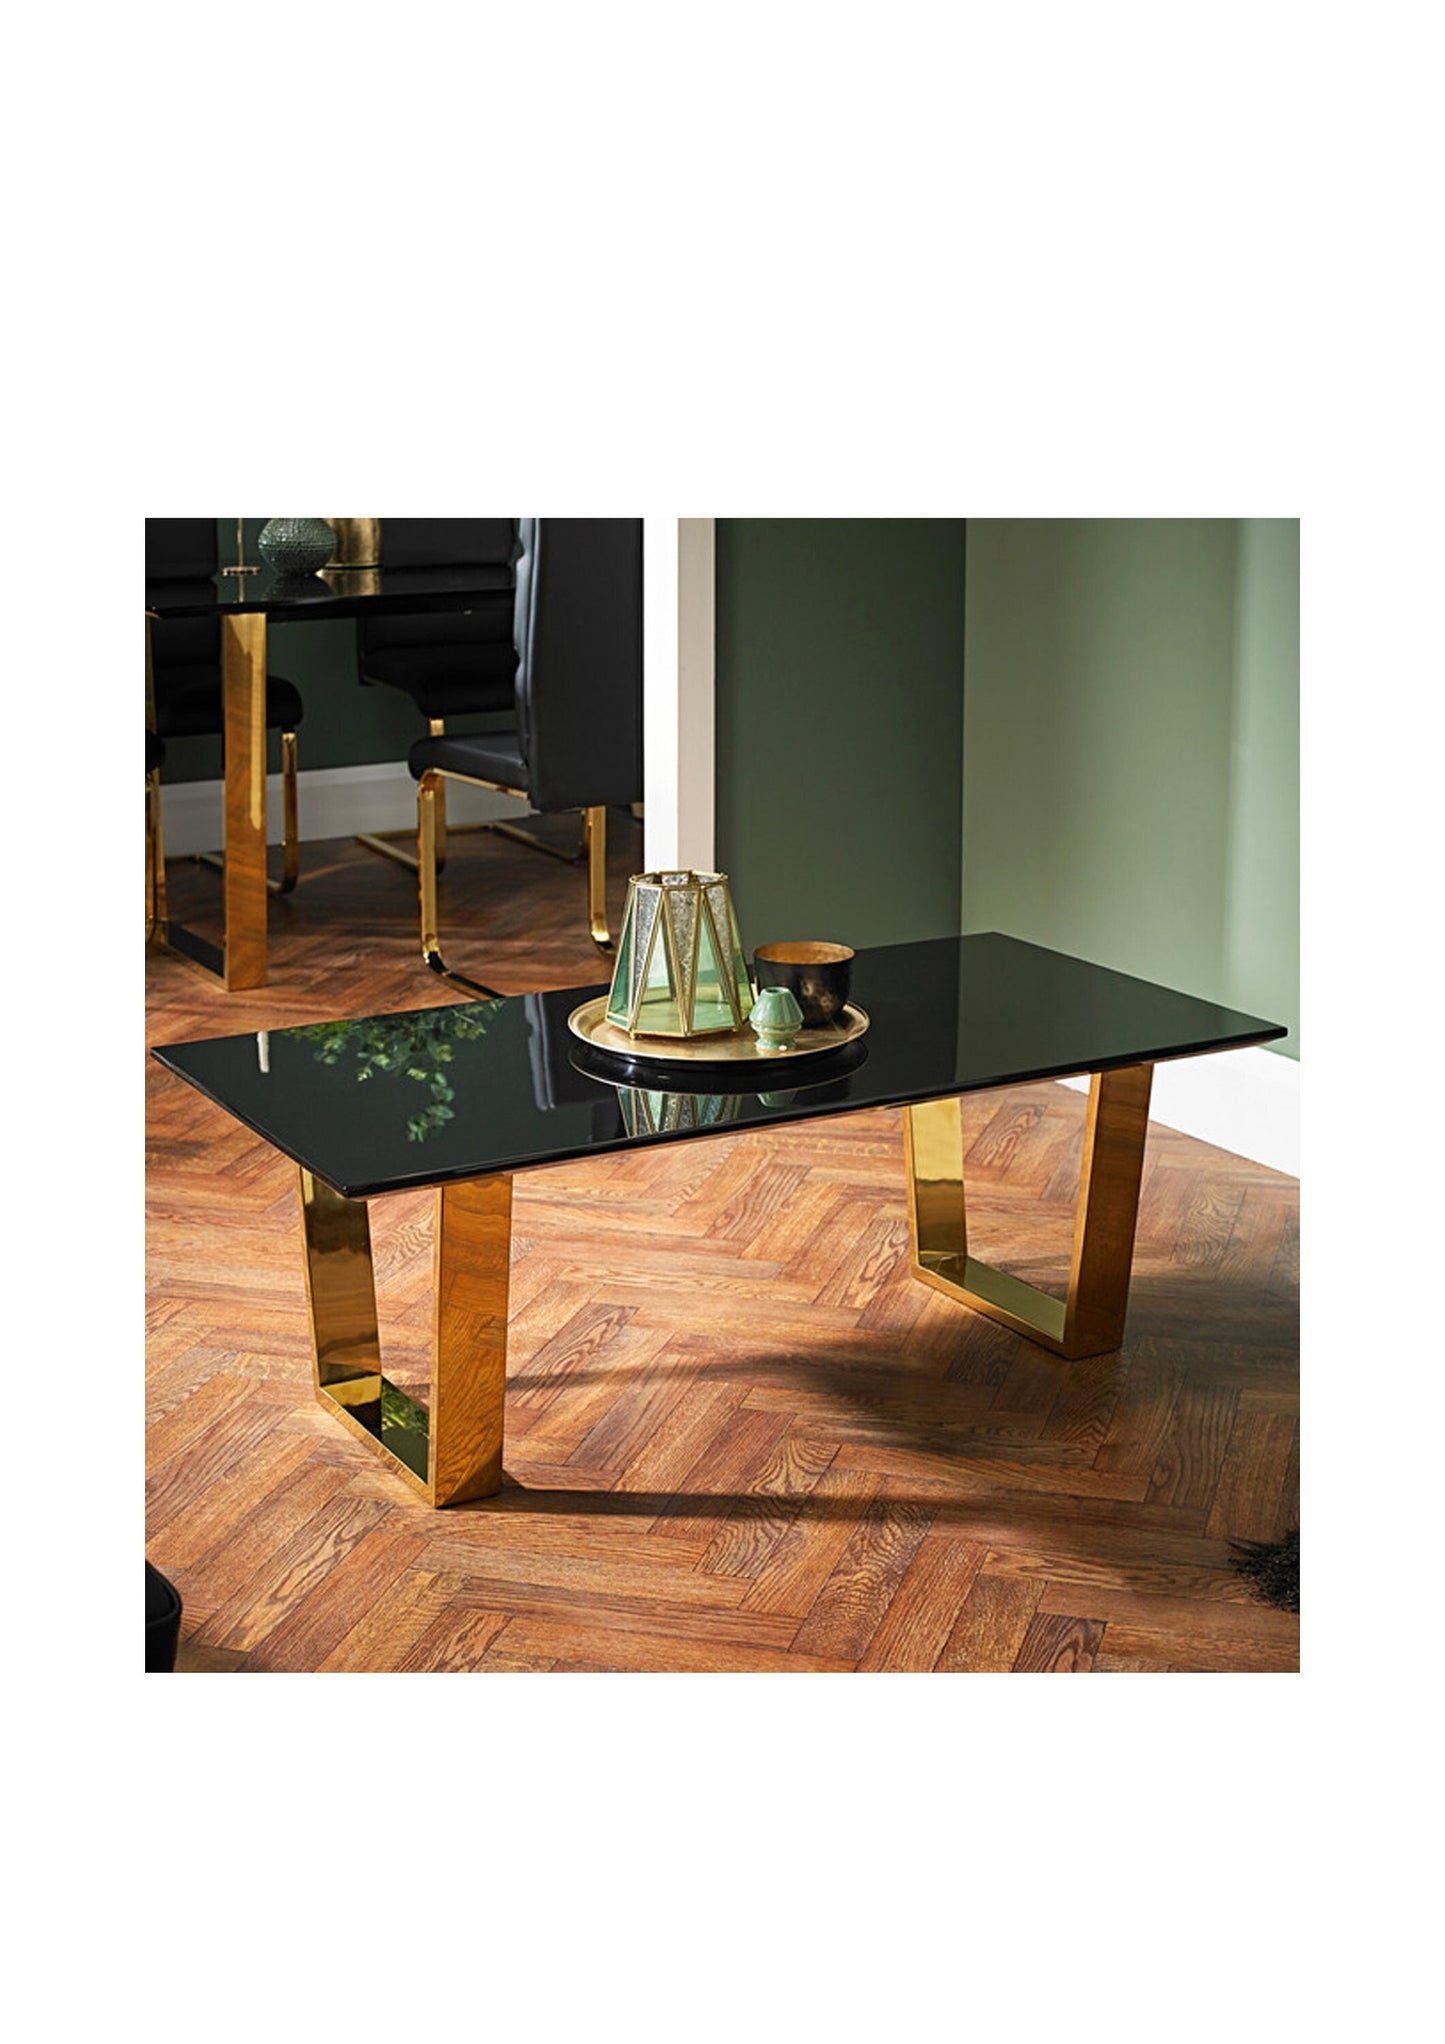 Luxurious High Gloss and Gold Legs Coffee Table